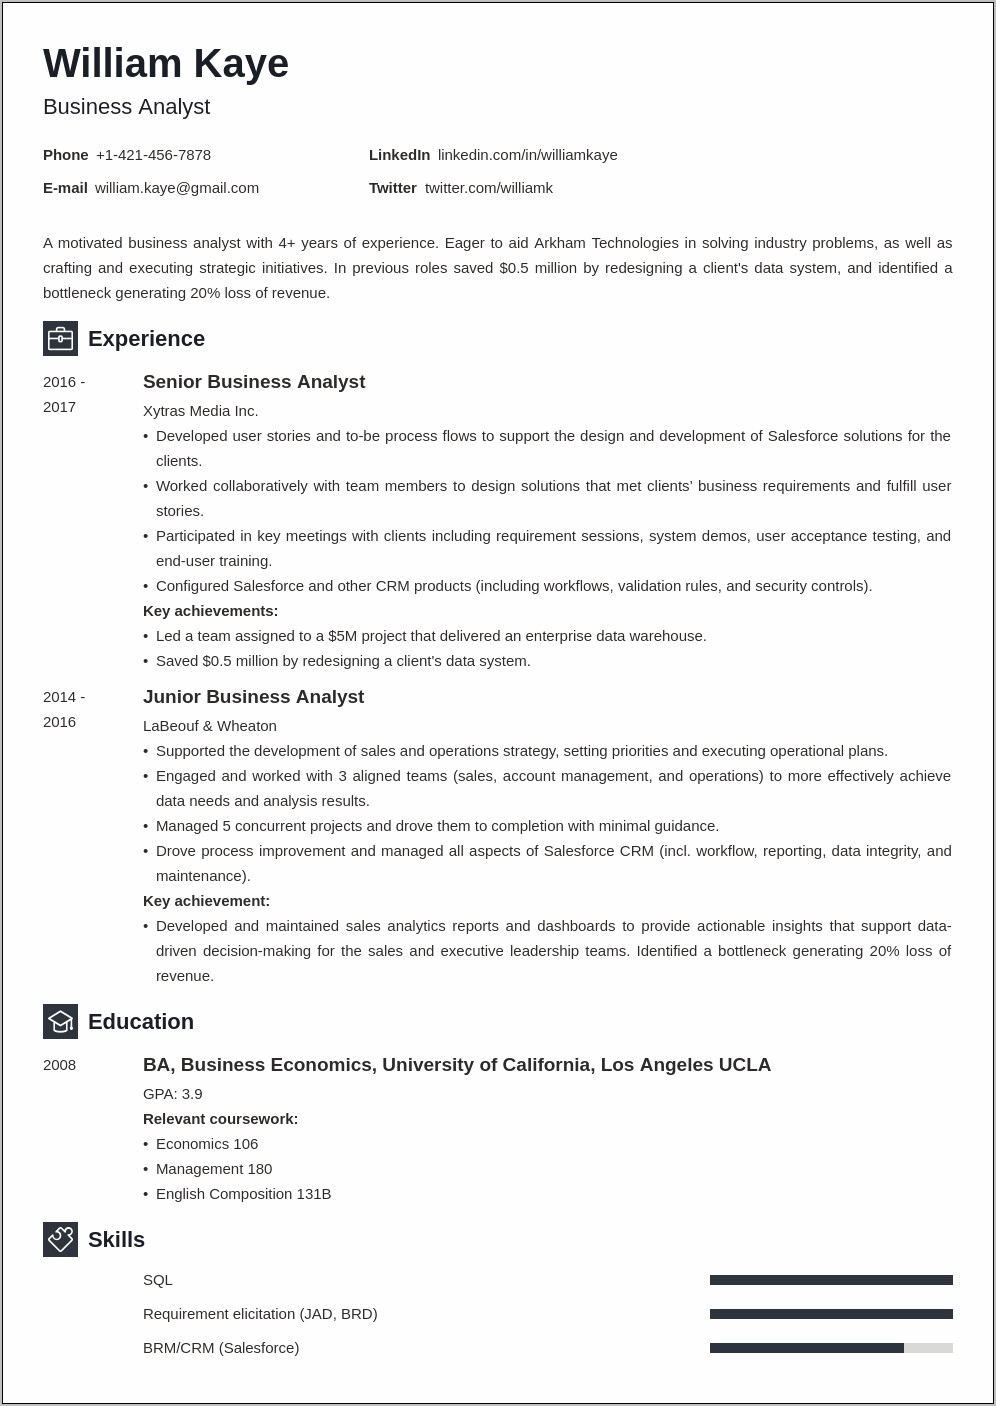 Resume Objective Statement For Business Analyst